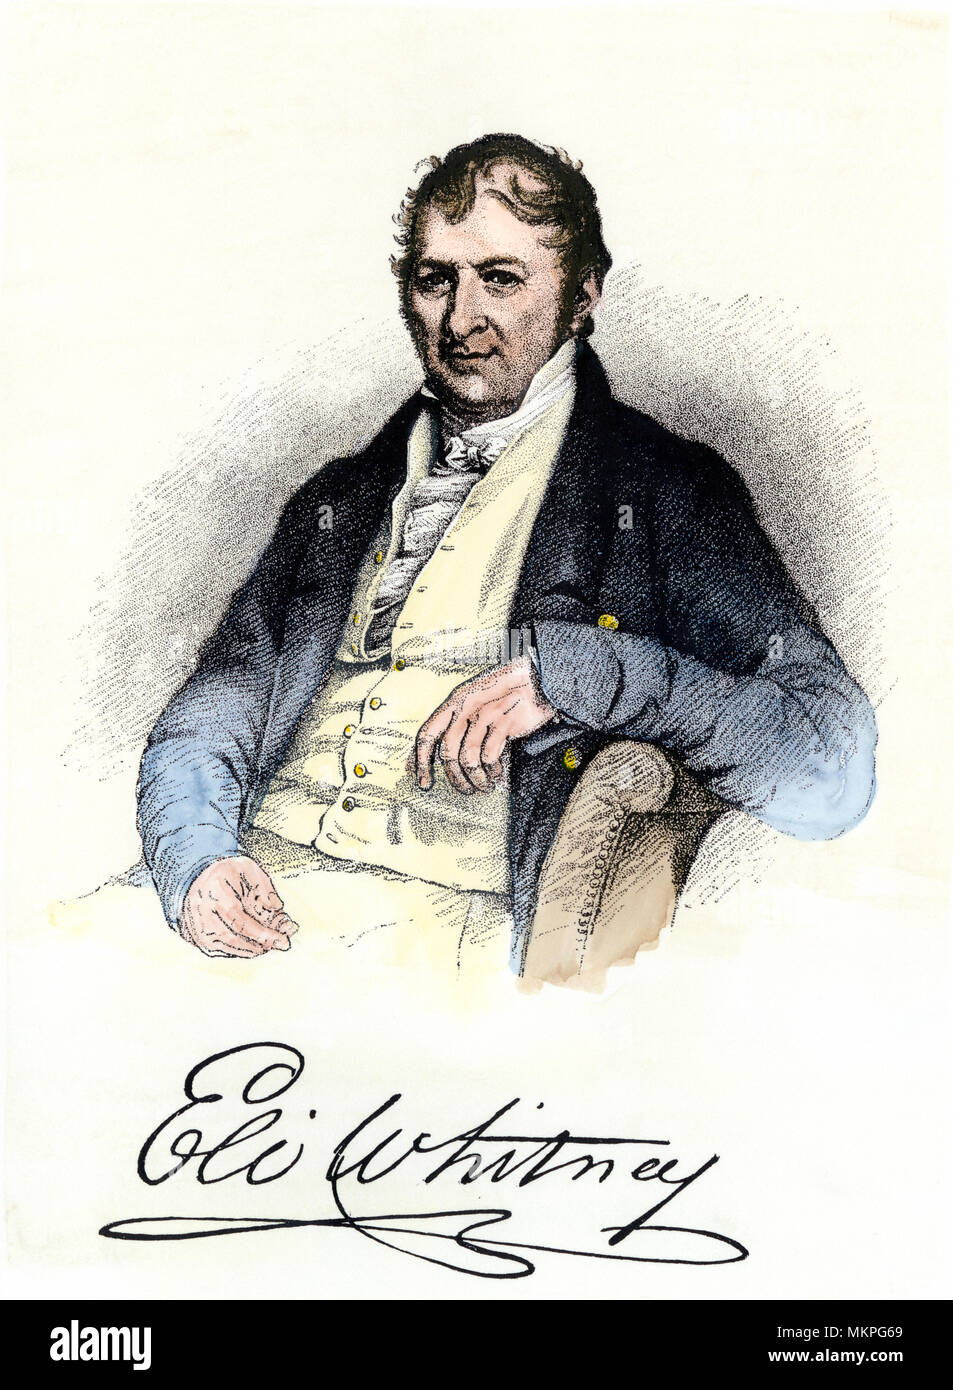 Eli Whitney, with autograph. Hand-colored engraving of a portrait from life Stock Photo